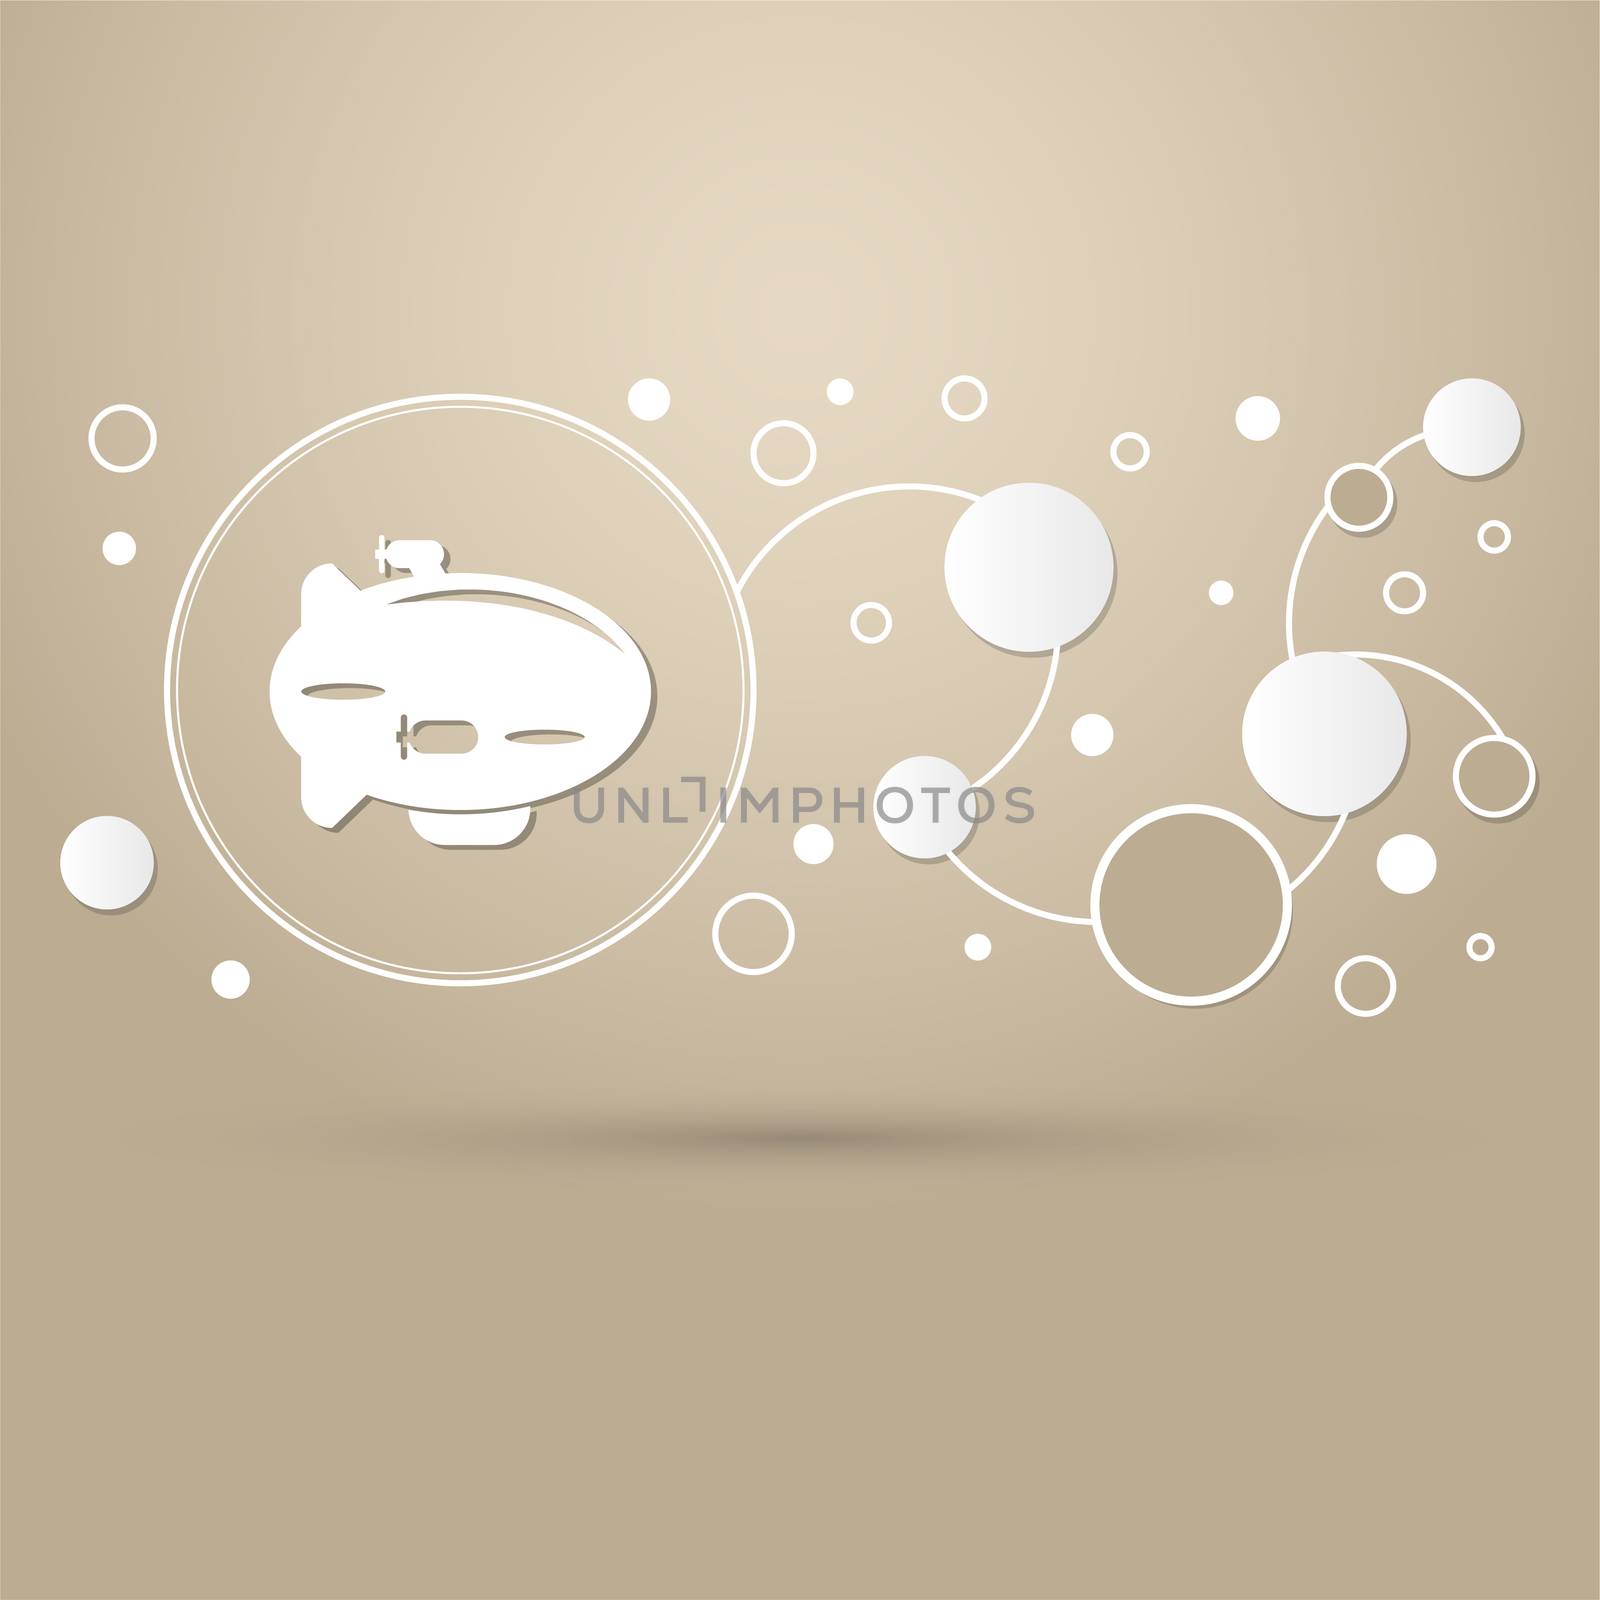 Airship Icon on a brown background with elegant style and modern design infographic. illustration